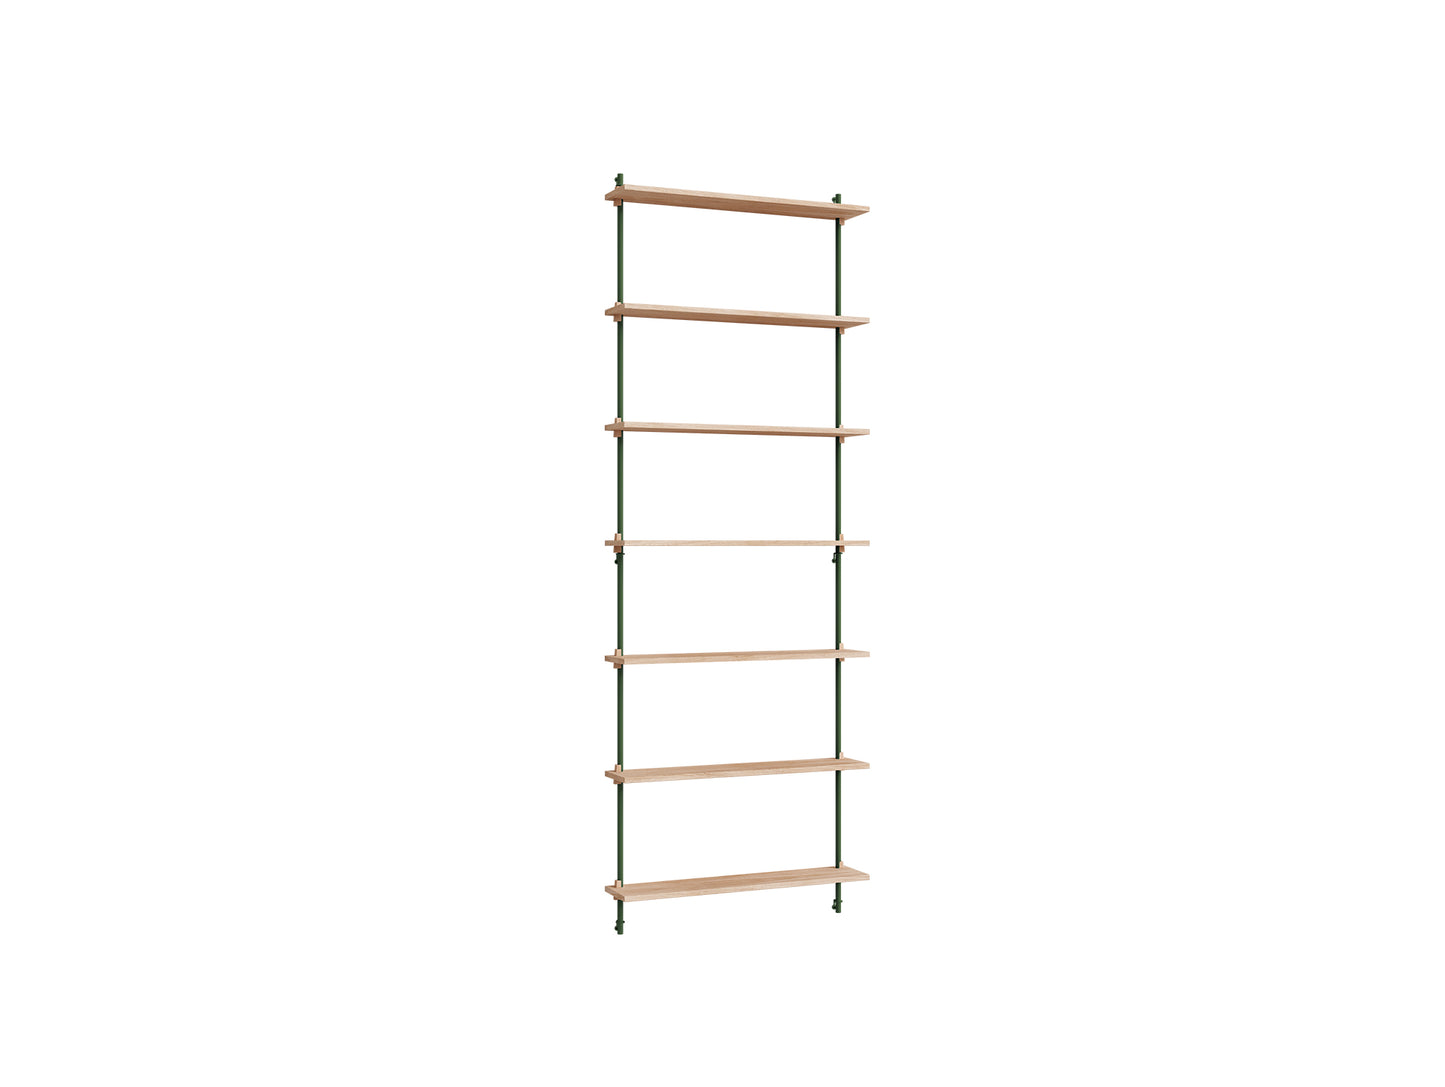 Wall Shelving System Sets (230 cm) by Moebe - WS.230.1 / Pine Green Uprights / Oiled Oak